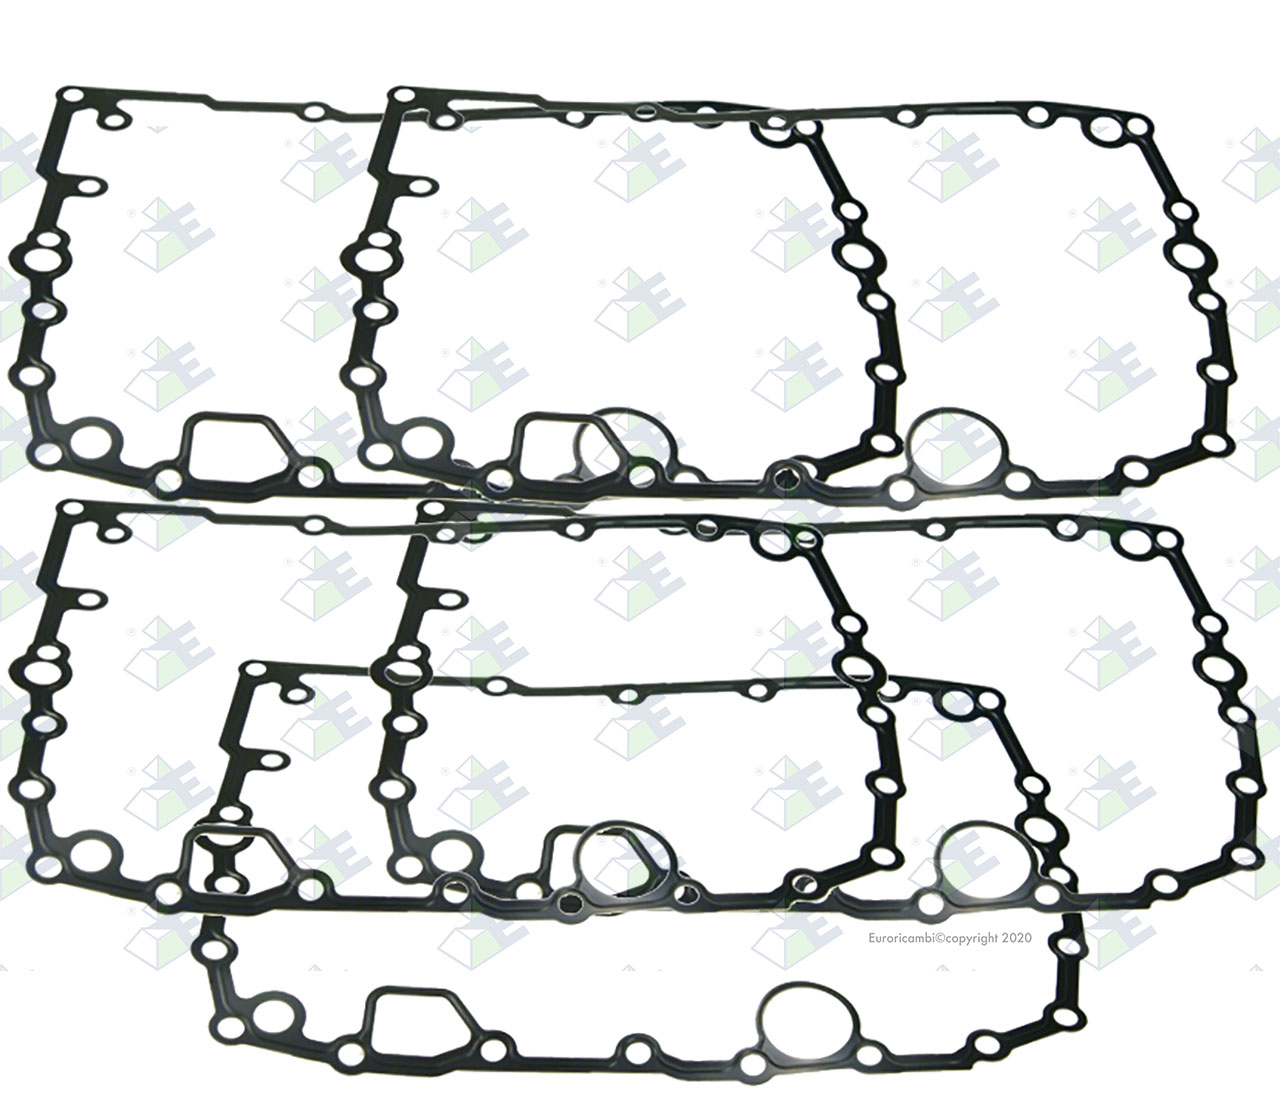 SHEET GASKET suitable to ZF TRANSMISSIONS 1315301005